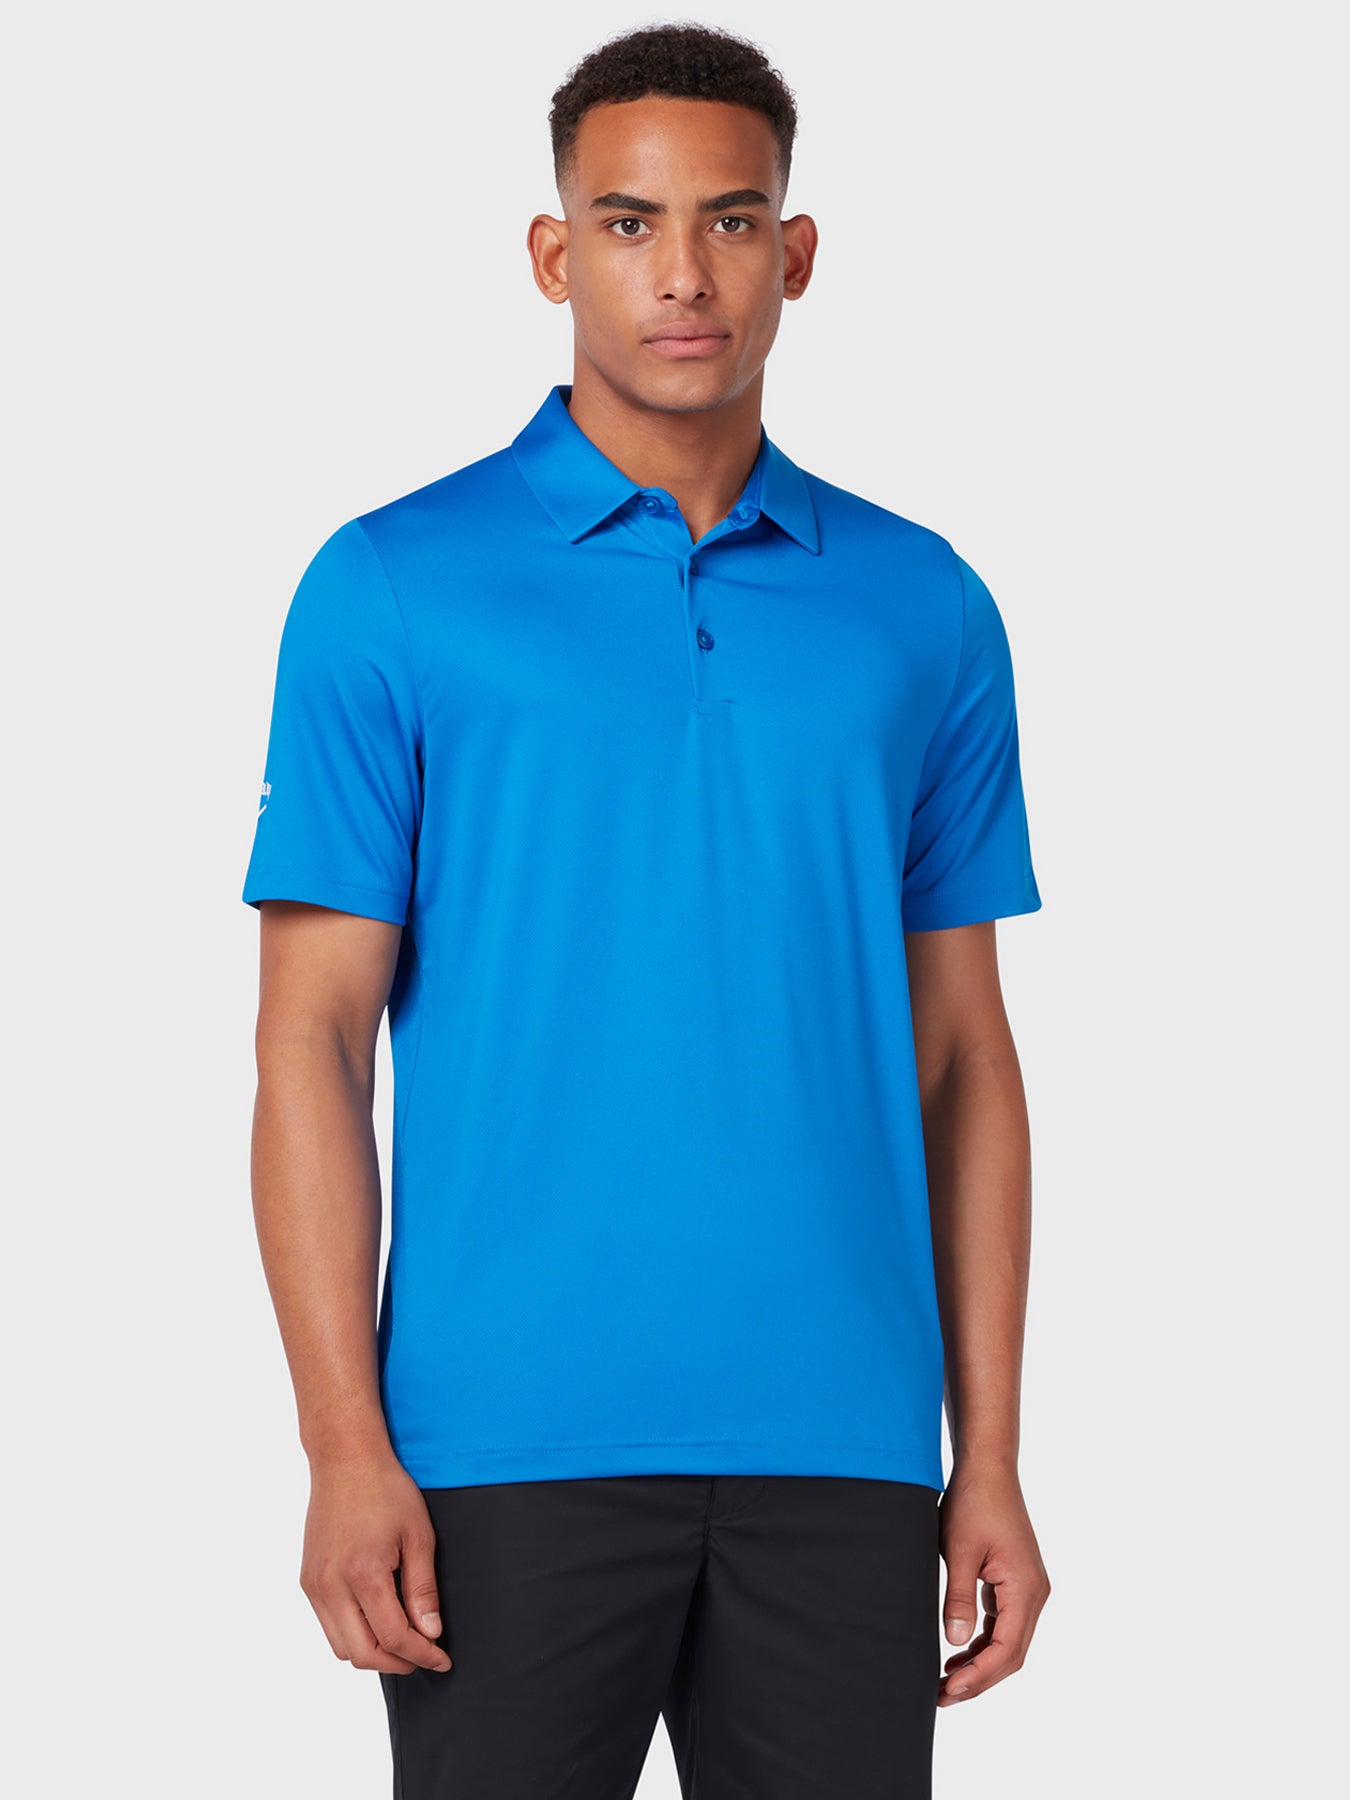 View Swing Tech Tour Polo In Magnetic Blue Magnetic Blue L information